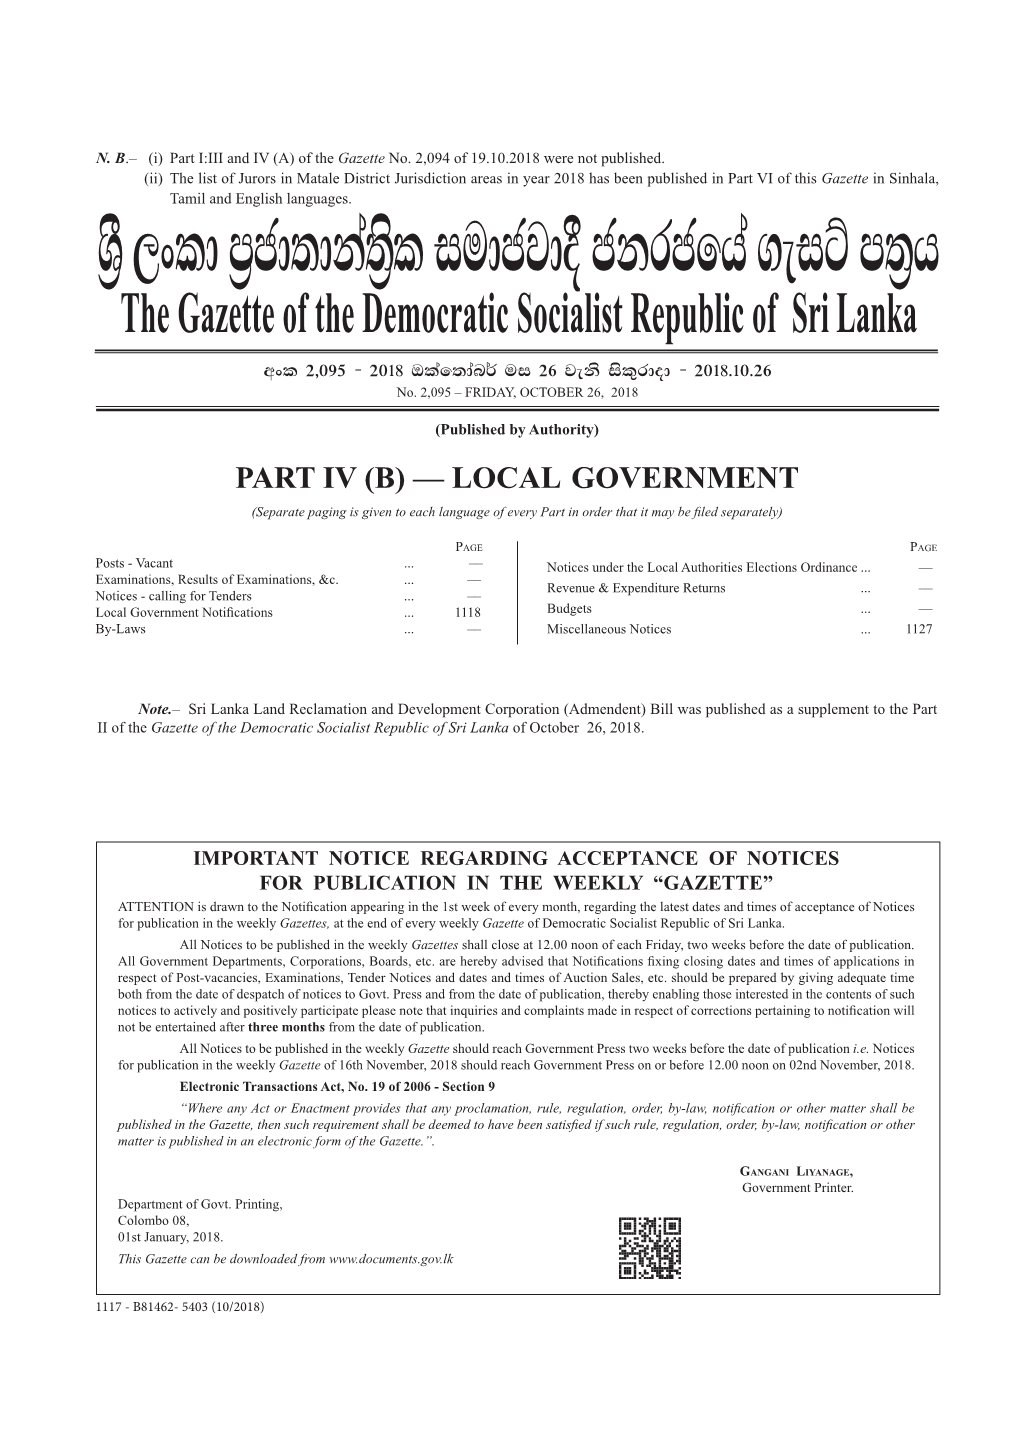 Local Government (Separate Paging Is Given to Each Language of Every Part in Order That It May Be Filed Separately)